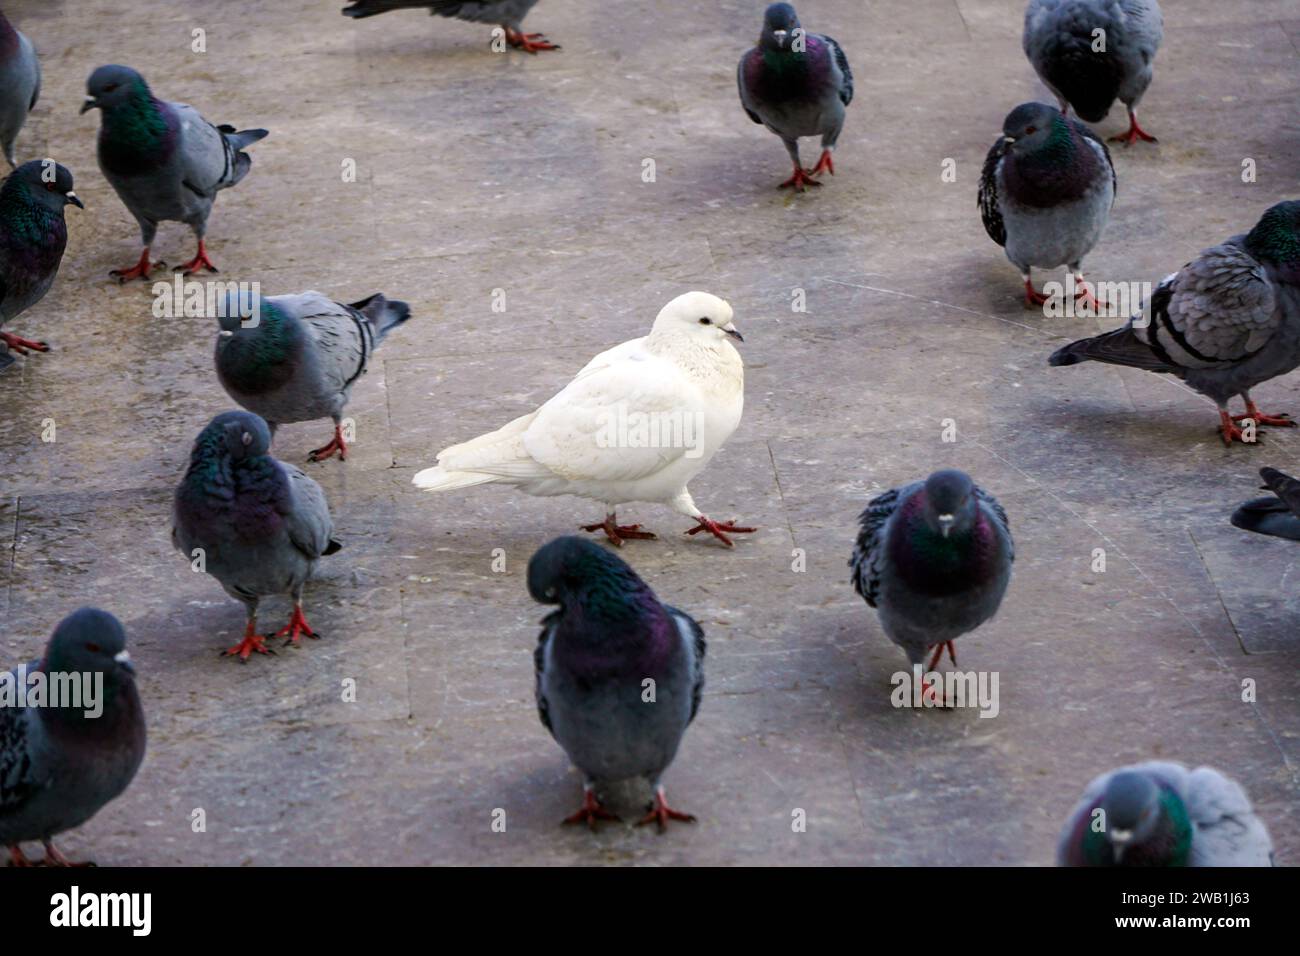 A flock of pigeons stands in a grassy area Stock Photo